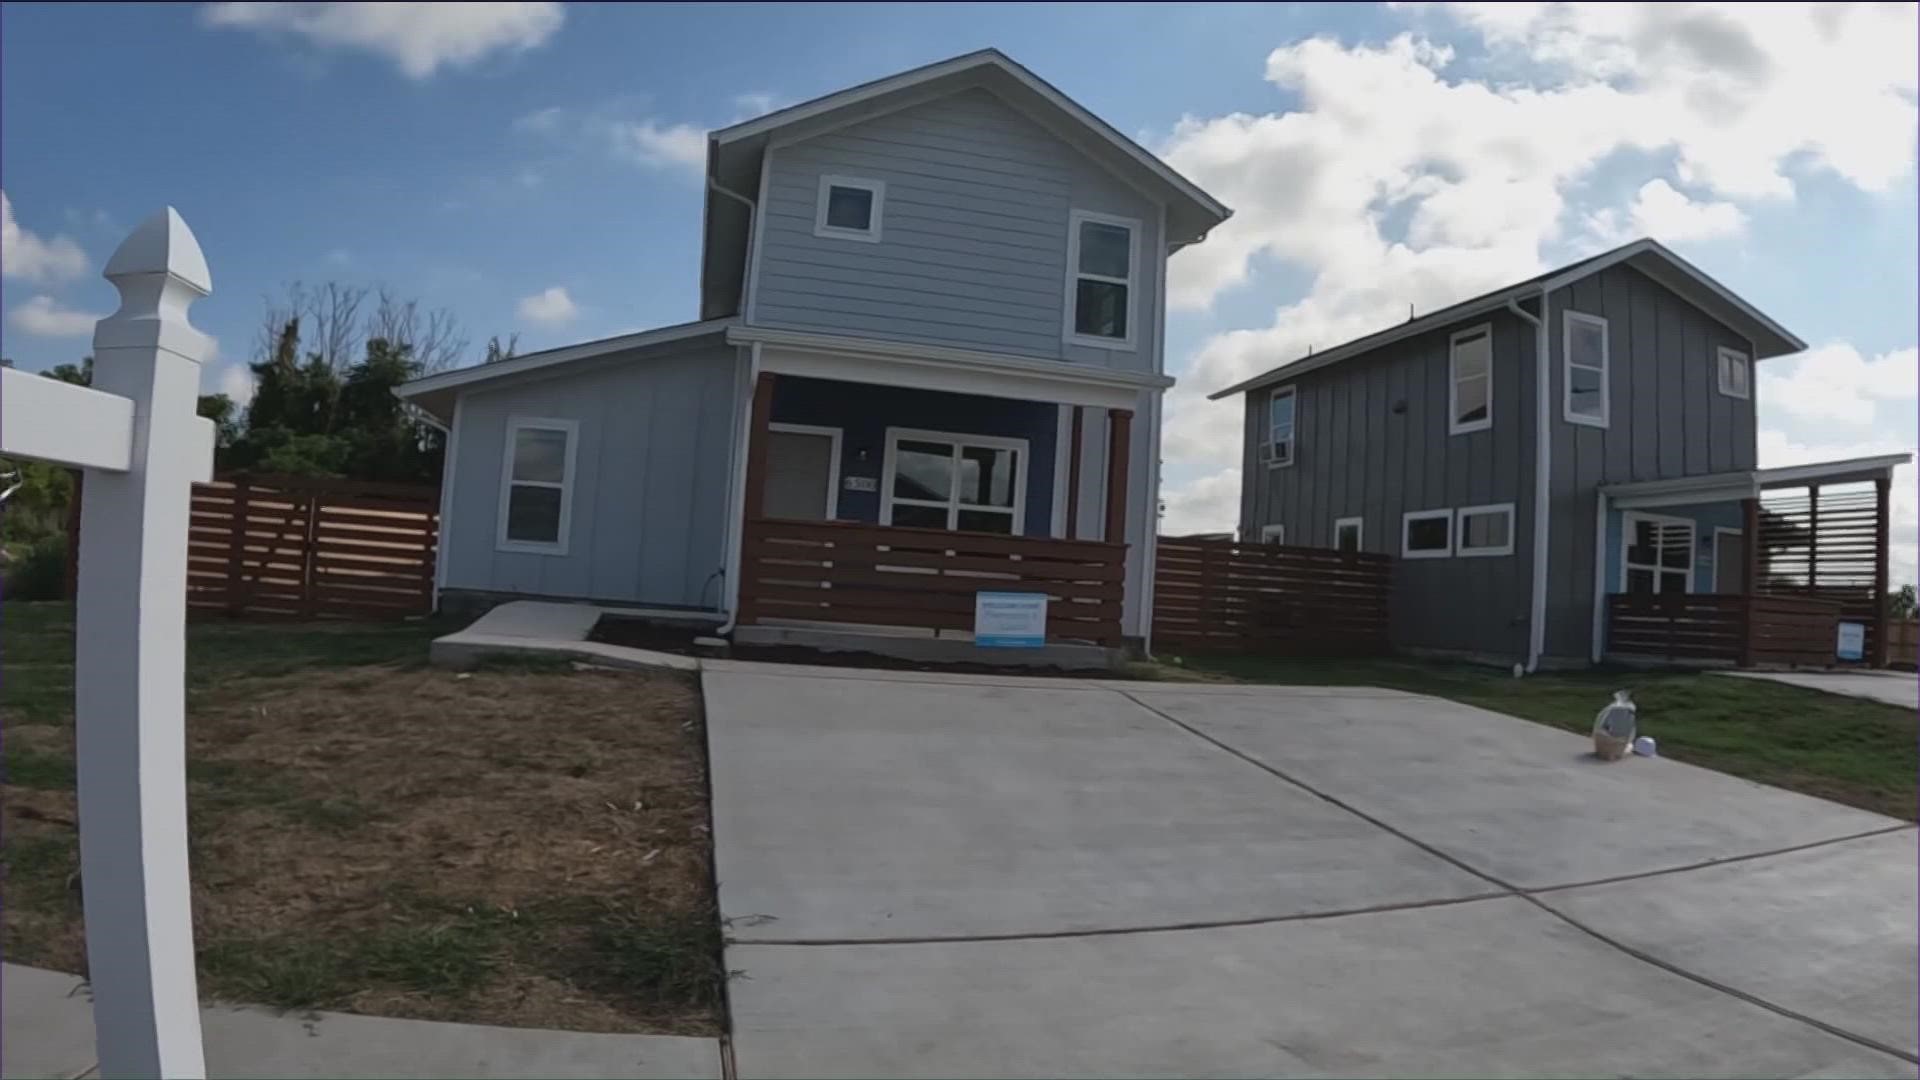 Seven local families just had their dreams of becoming homeowners turn into reality.